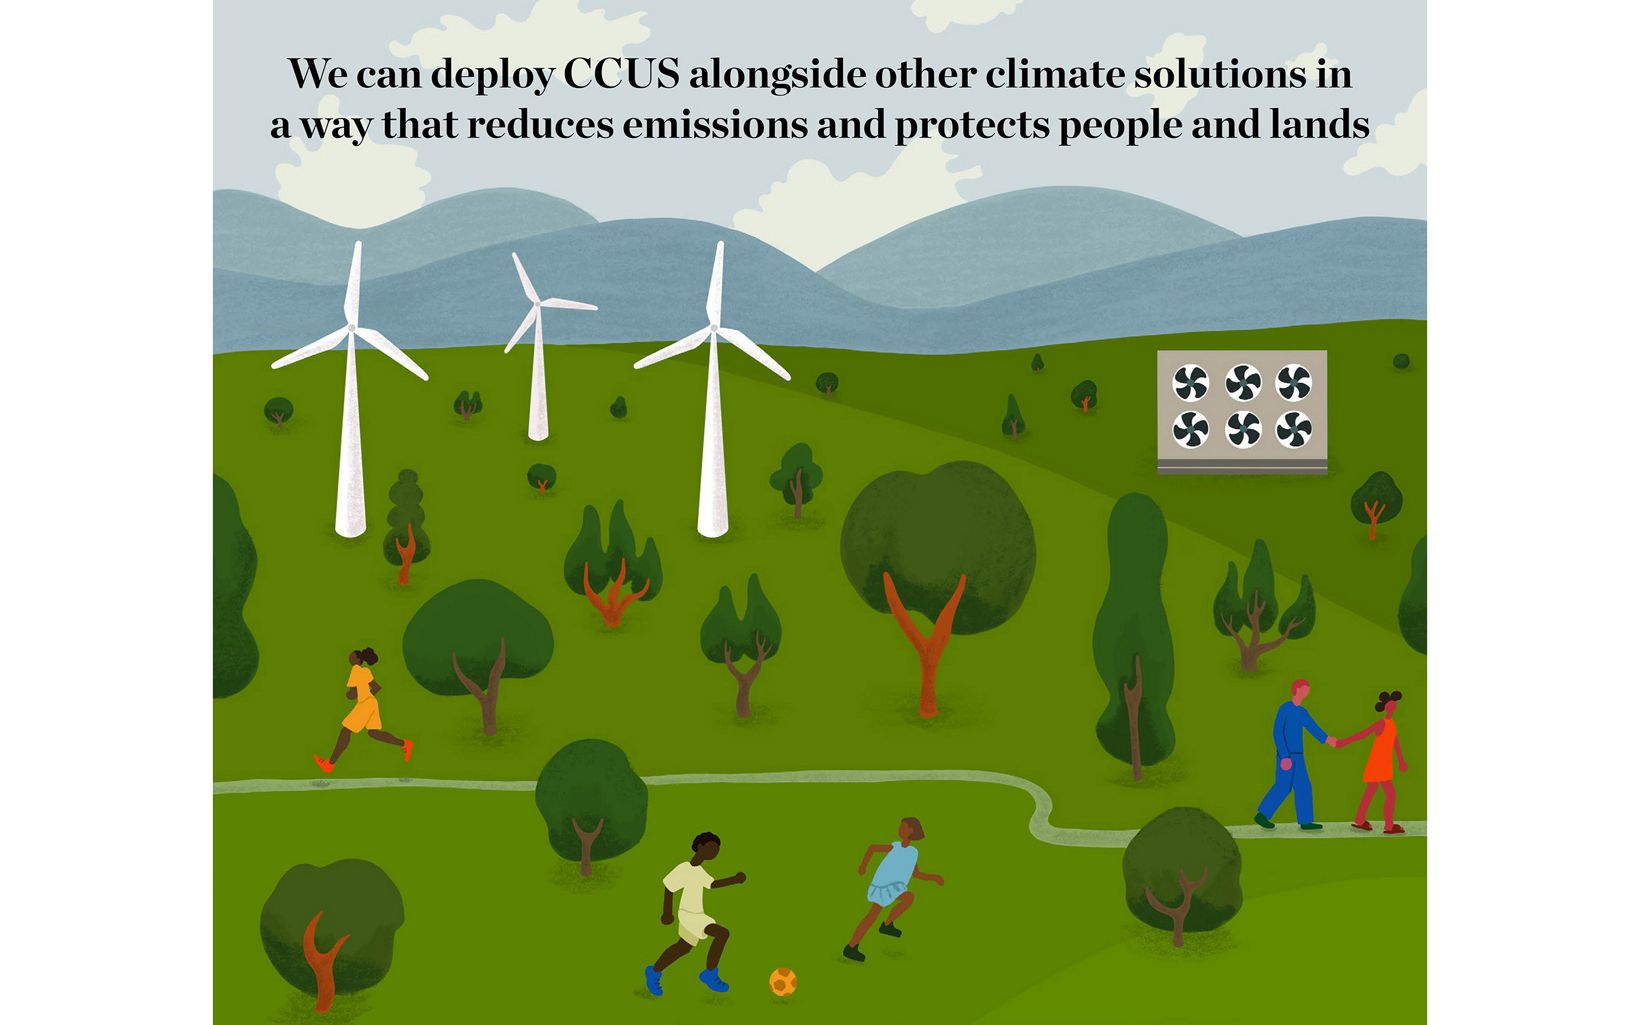 Illustration of an outdoor scene showing wind turbines, trees, mountains and people recreating in the foreground.